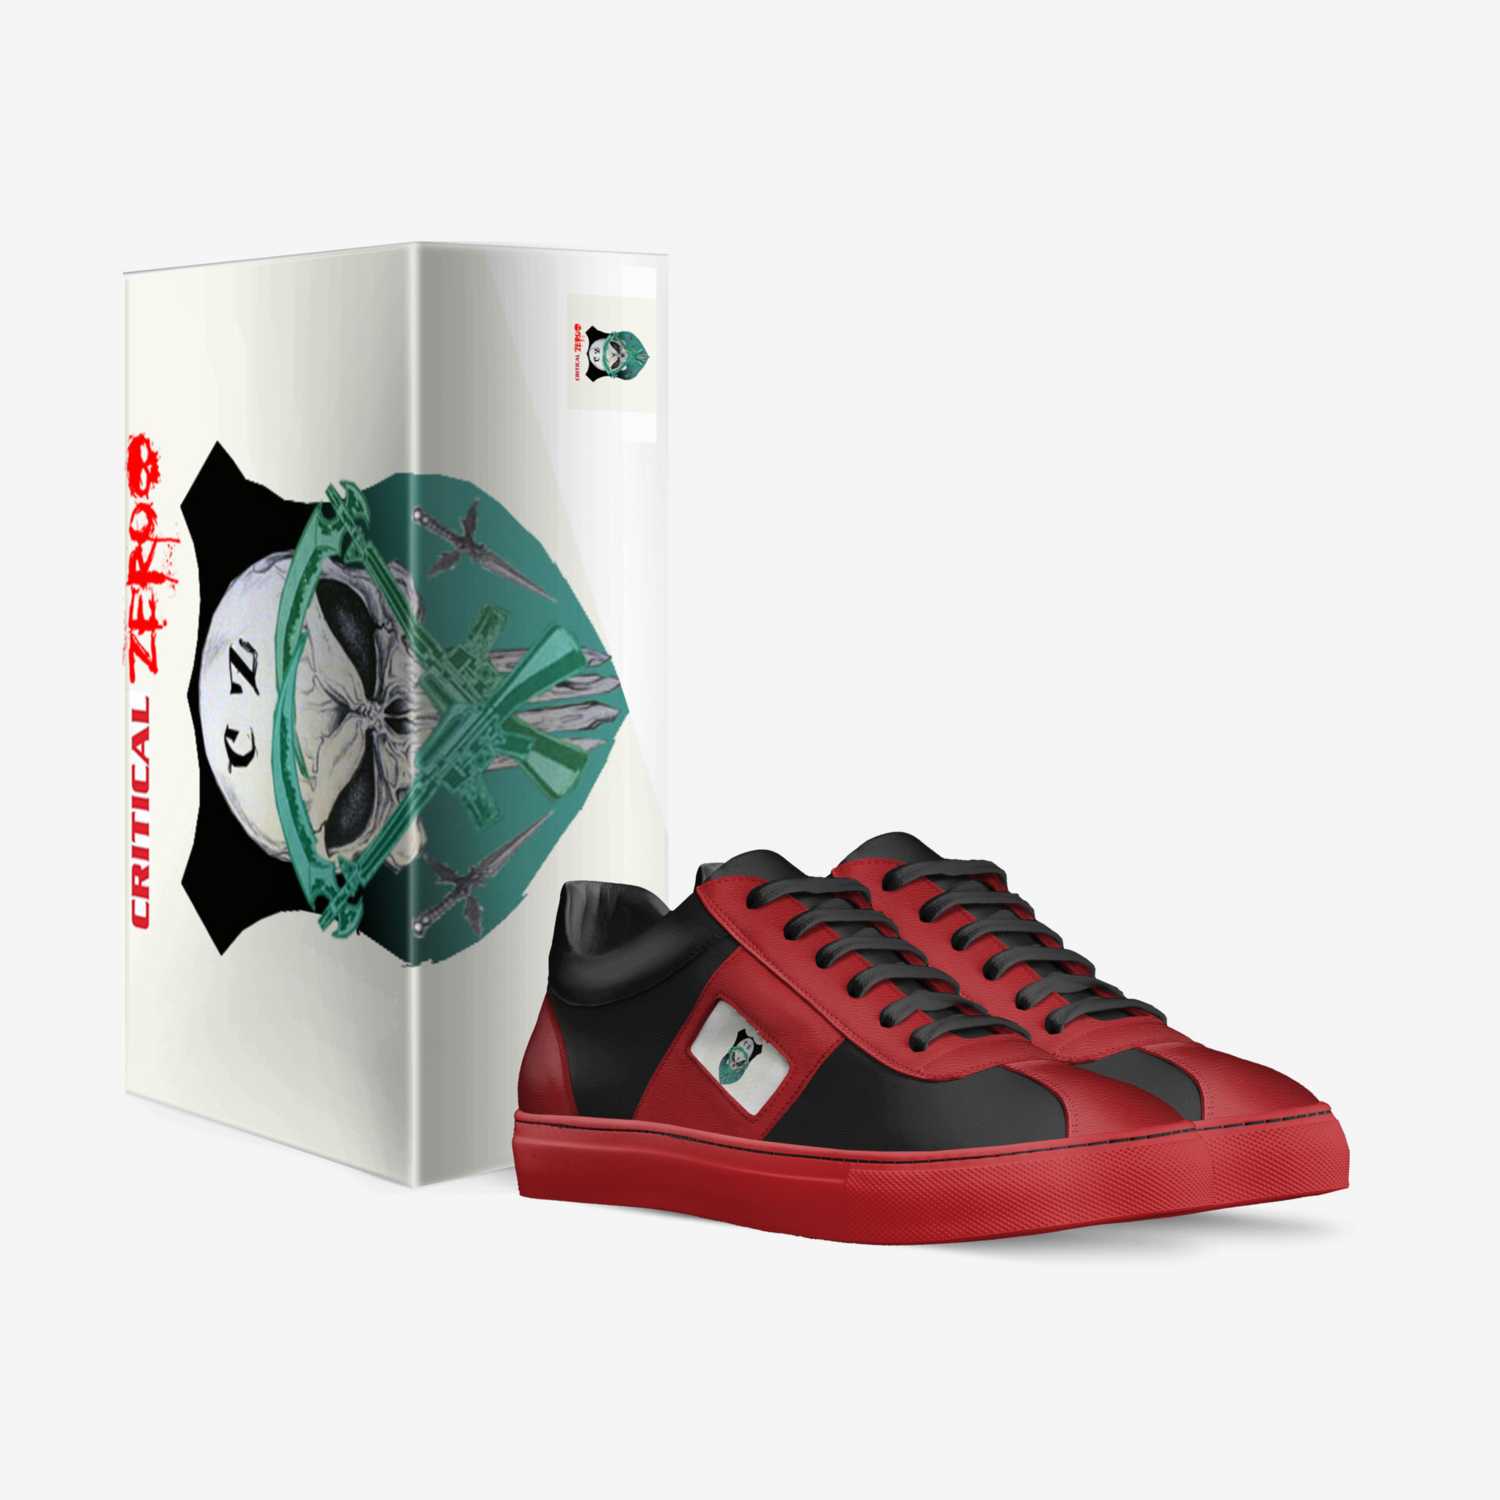 critical zero custom made in Italy shoes by Eisith Mounce | Box view